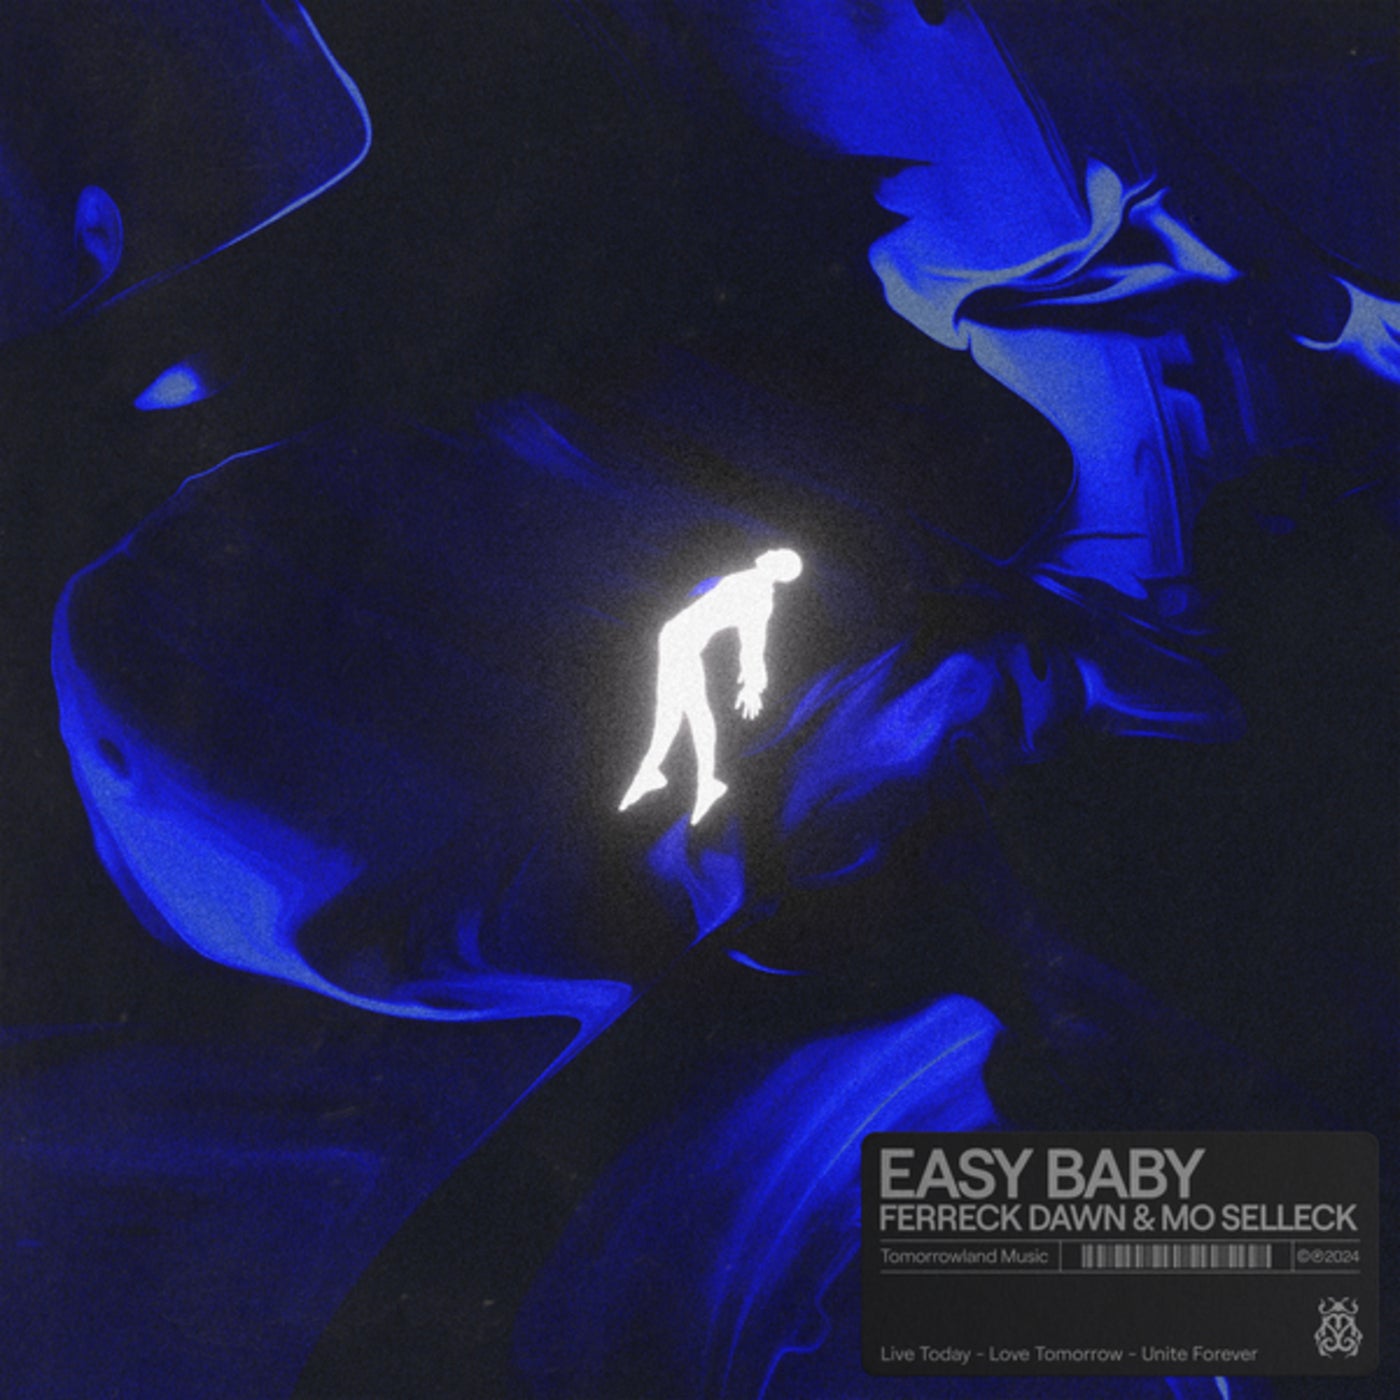 image cover: Ferreck Dawn, Mo Selleck - Easy Baby (Extended Mix) on Tomorrowland Music